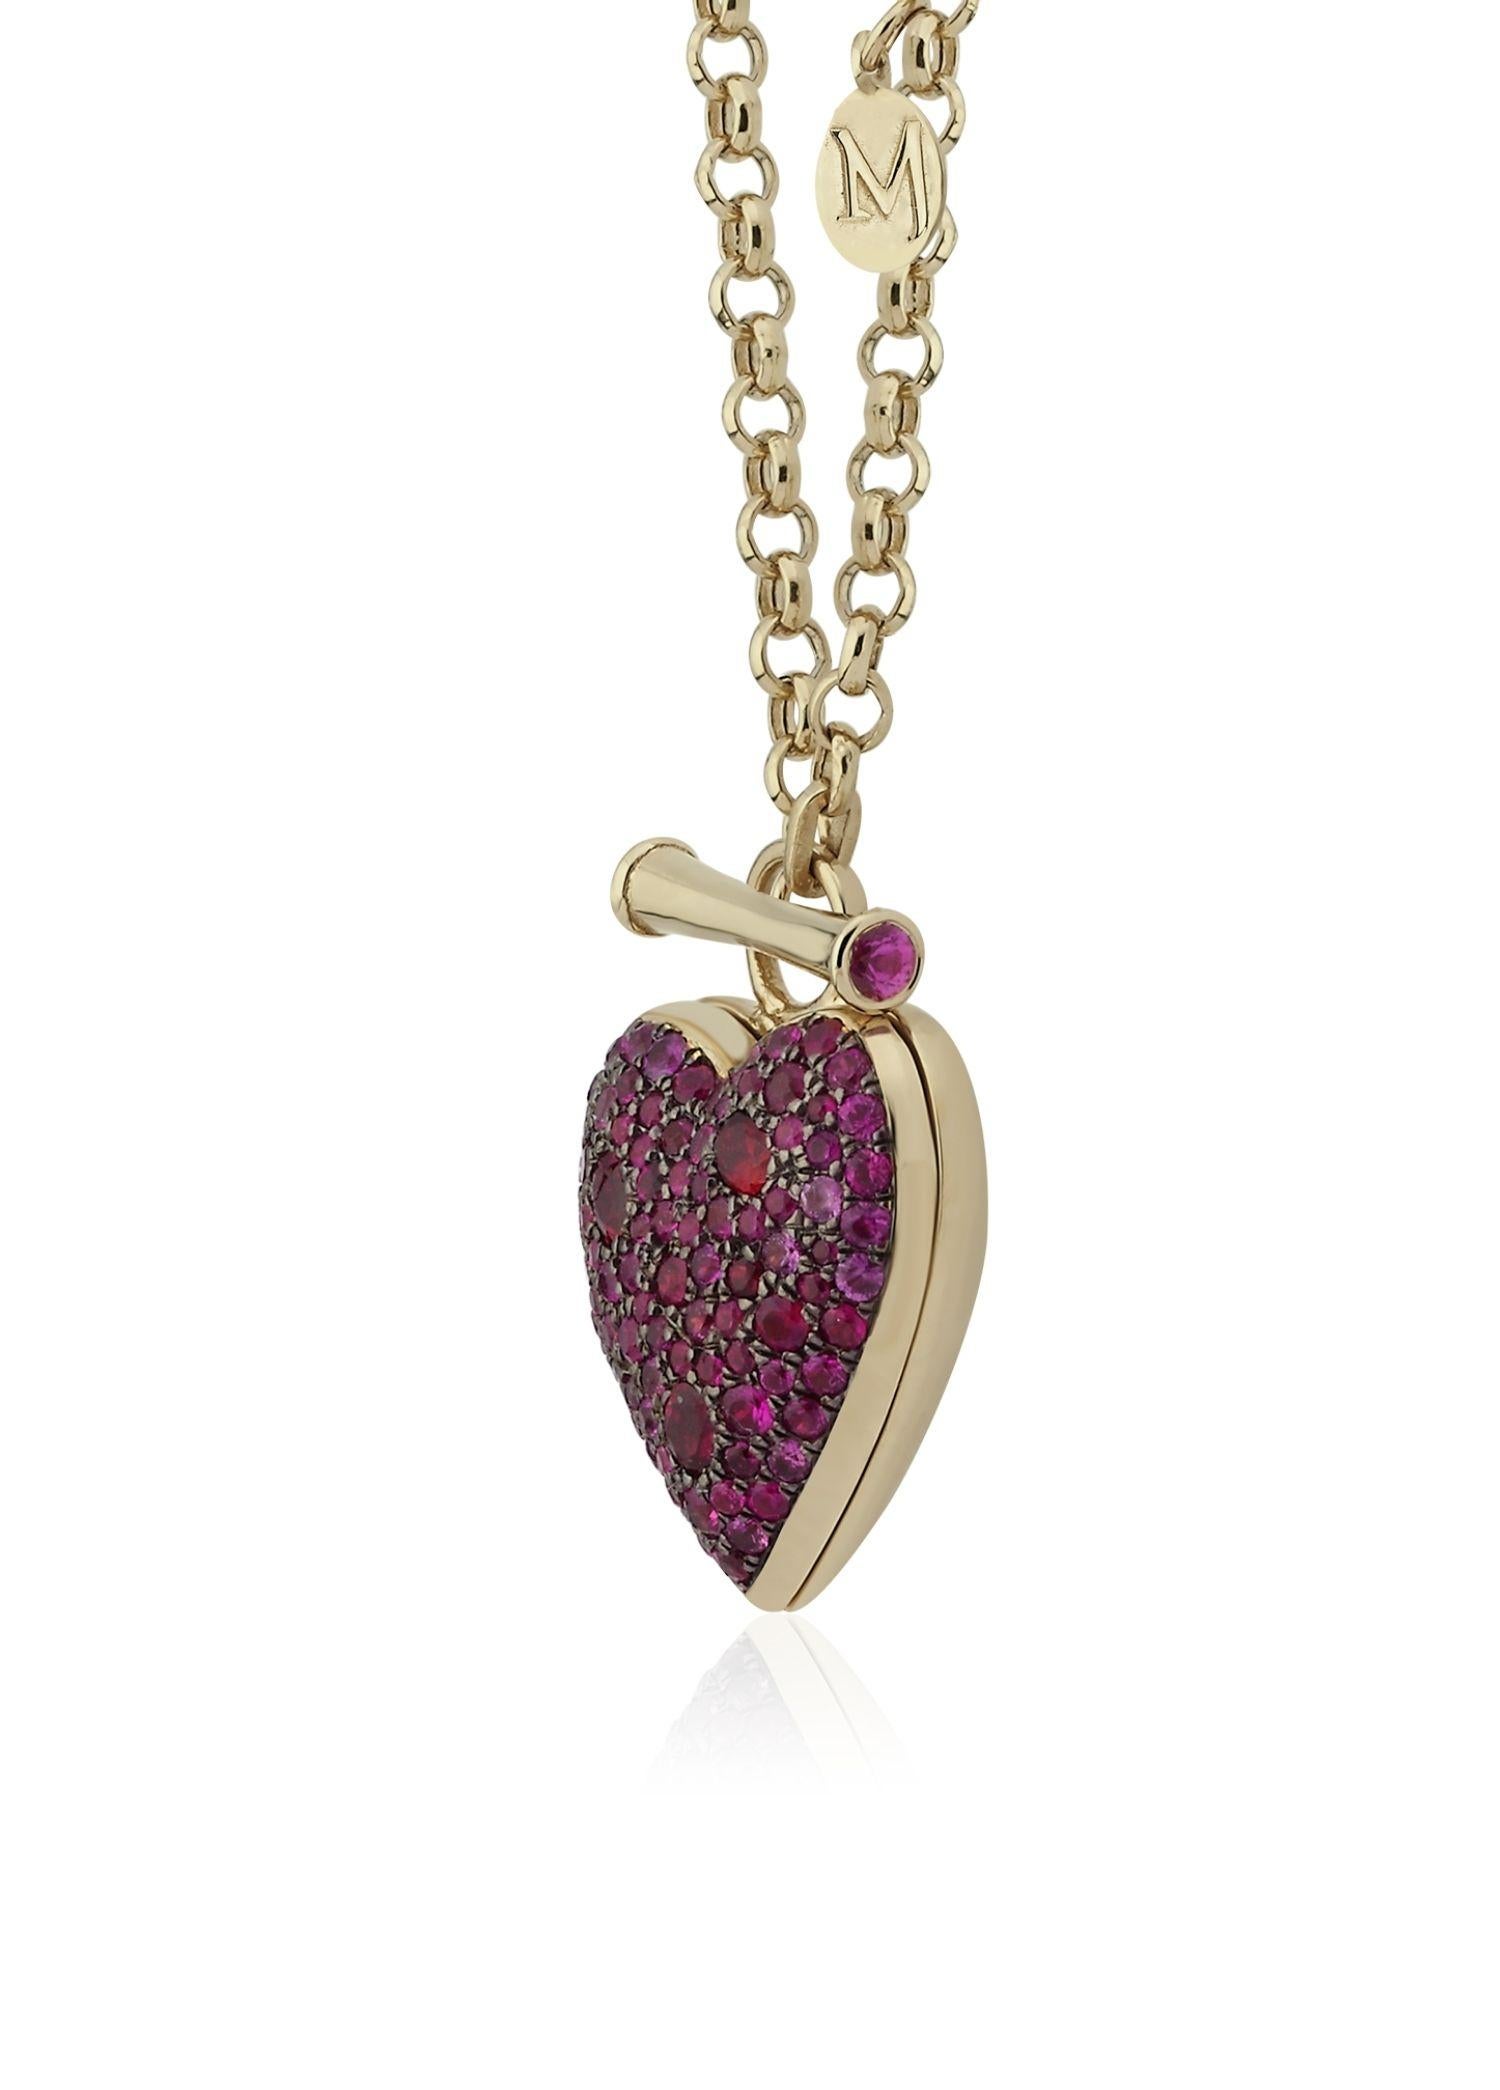 Melie Jewelry Heart Locket Necklace

14K Yellow Gold, 1.35 ct Ruby 
Locket Necklace comes with a gold 50 cm chain.

The Story Behind
Inspired by the phrase 